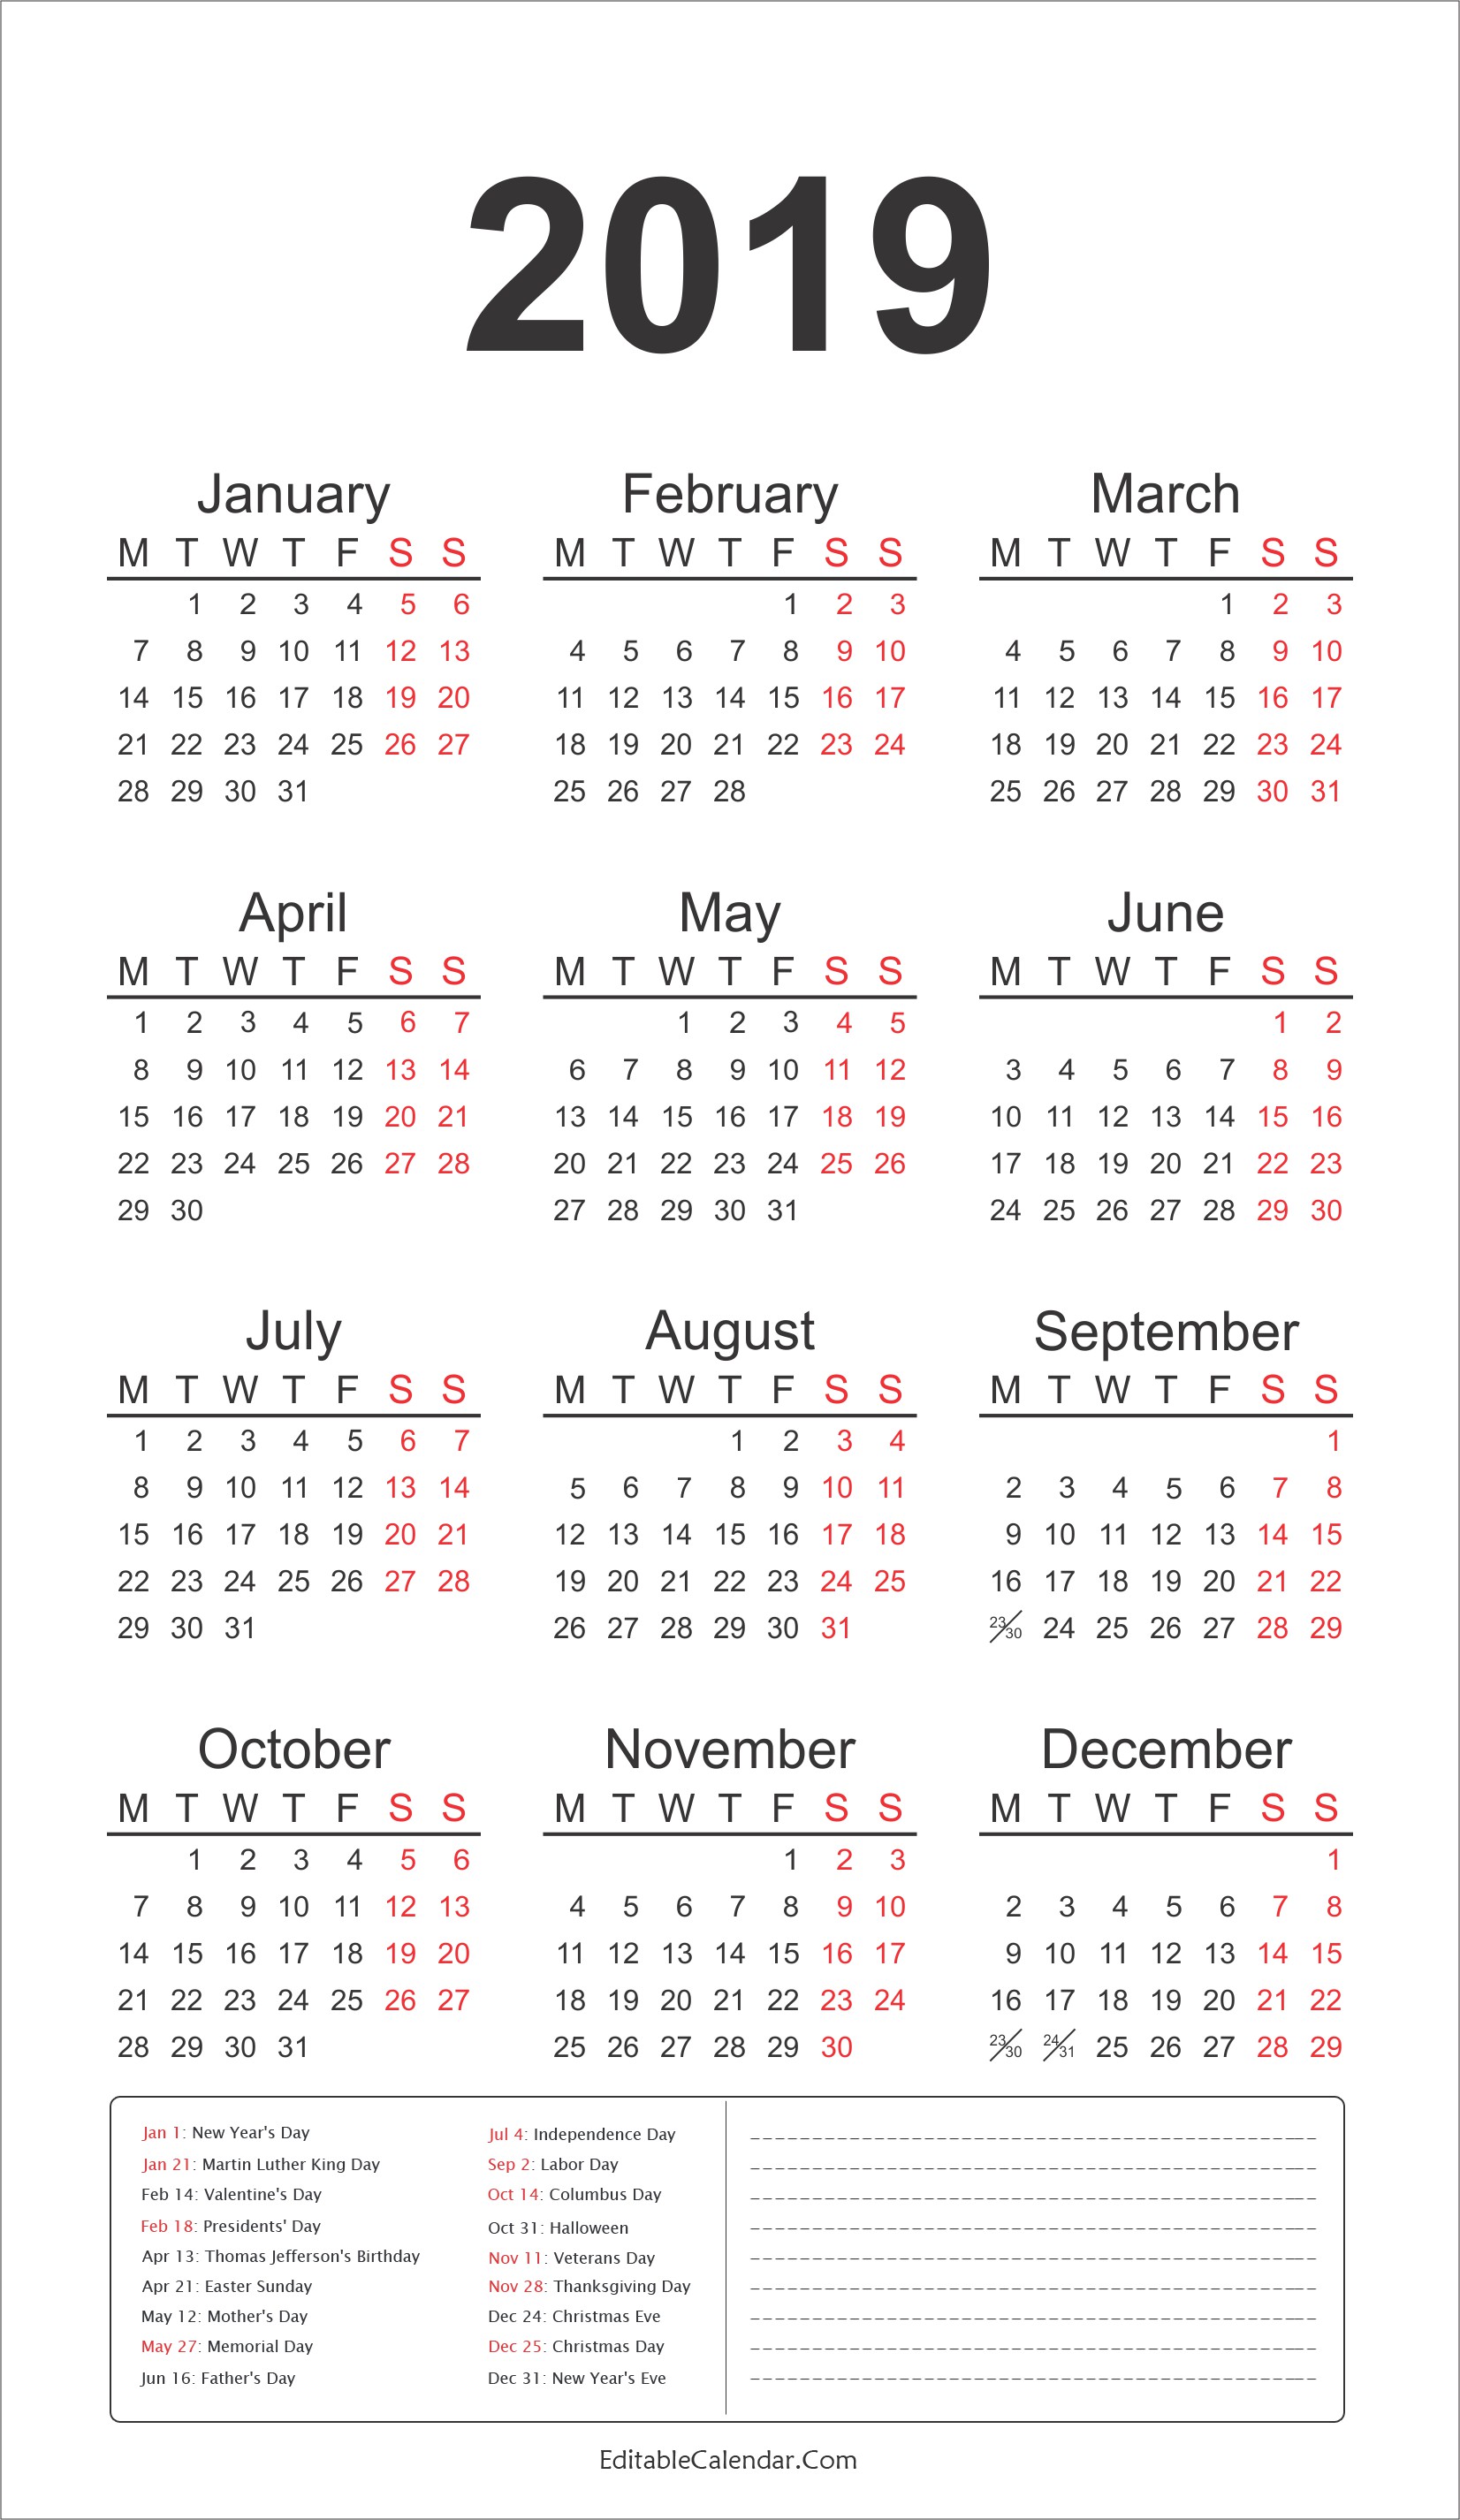 2019 Calendar Template with US Federal Holidays Yearly